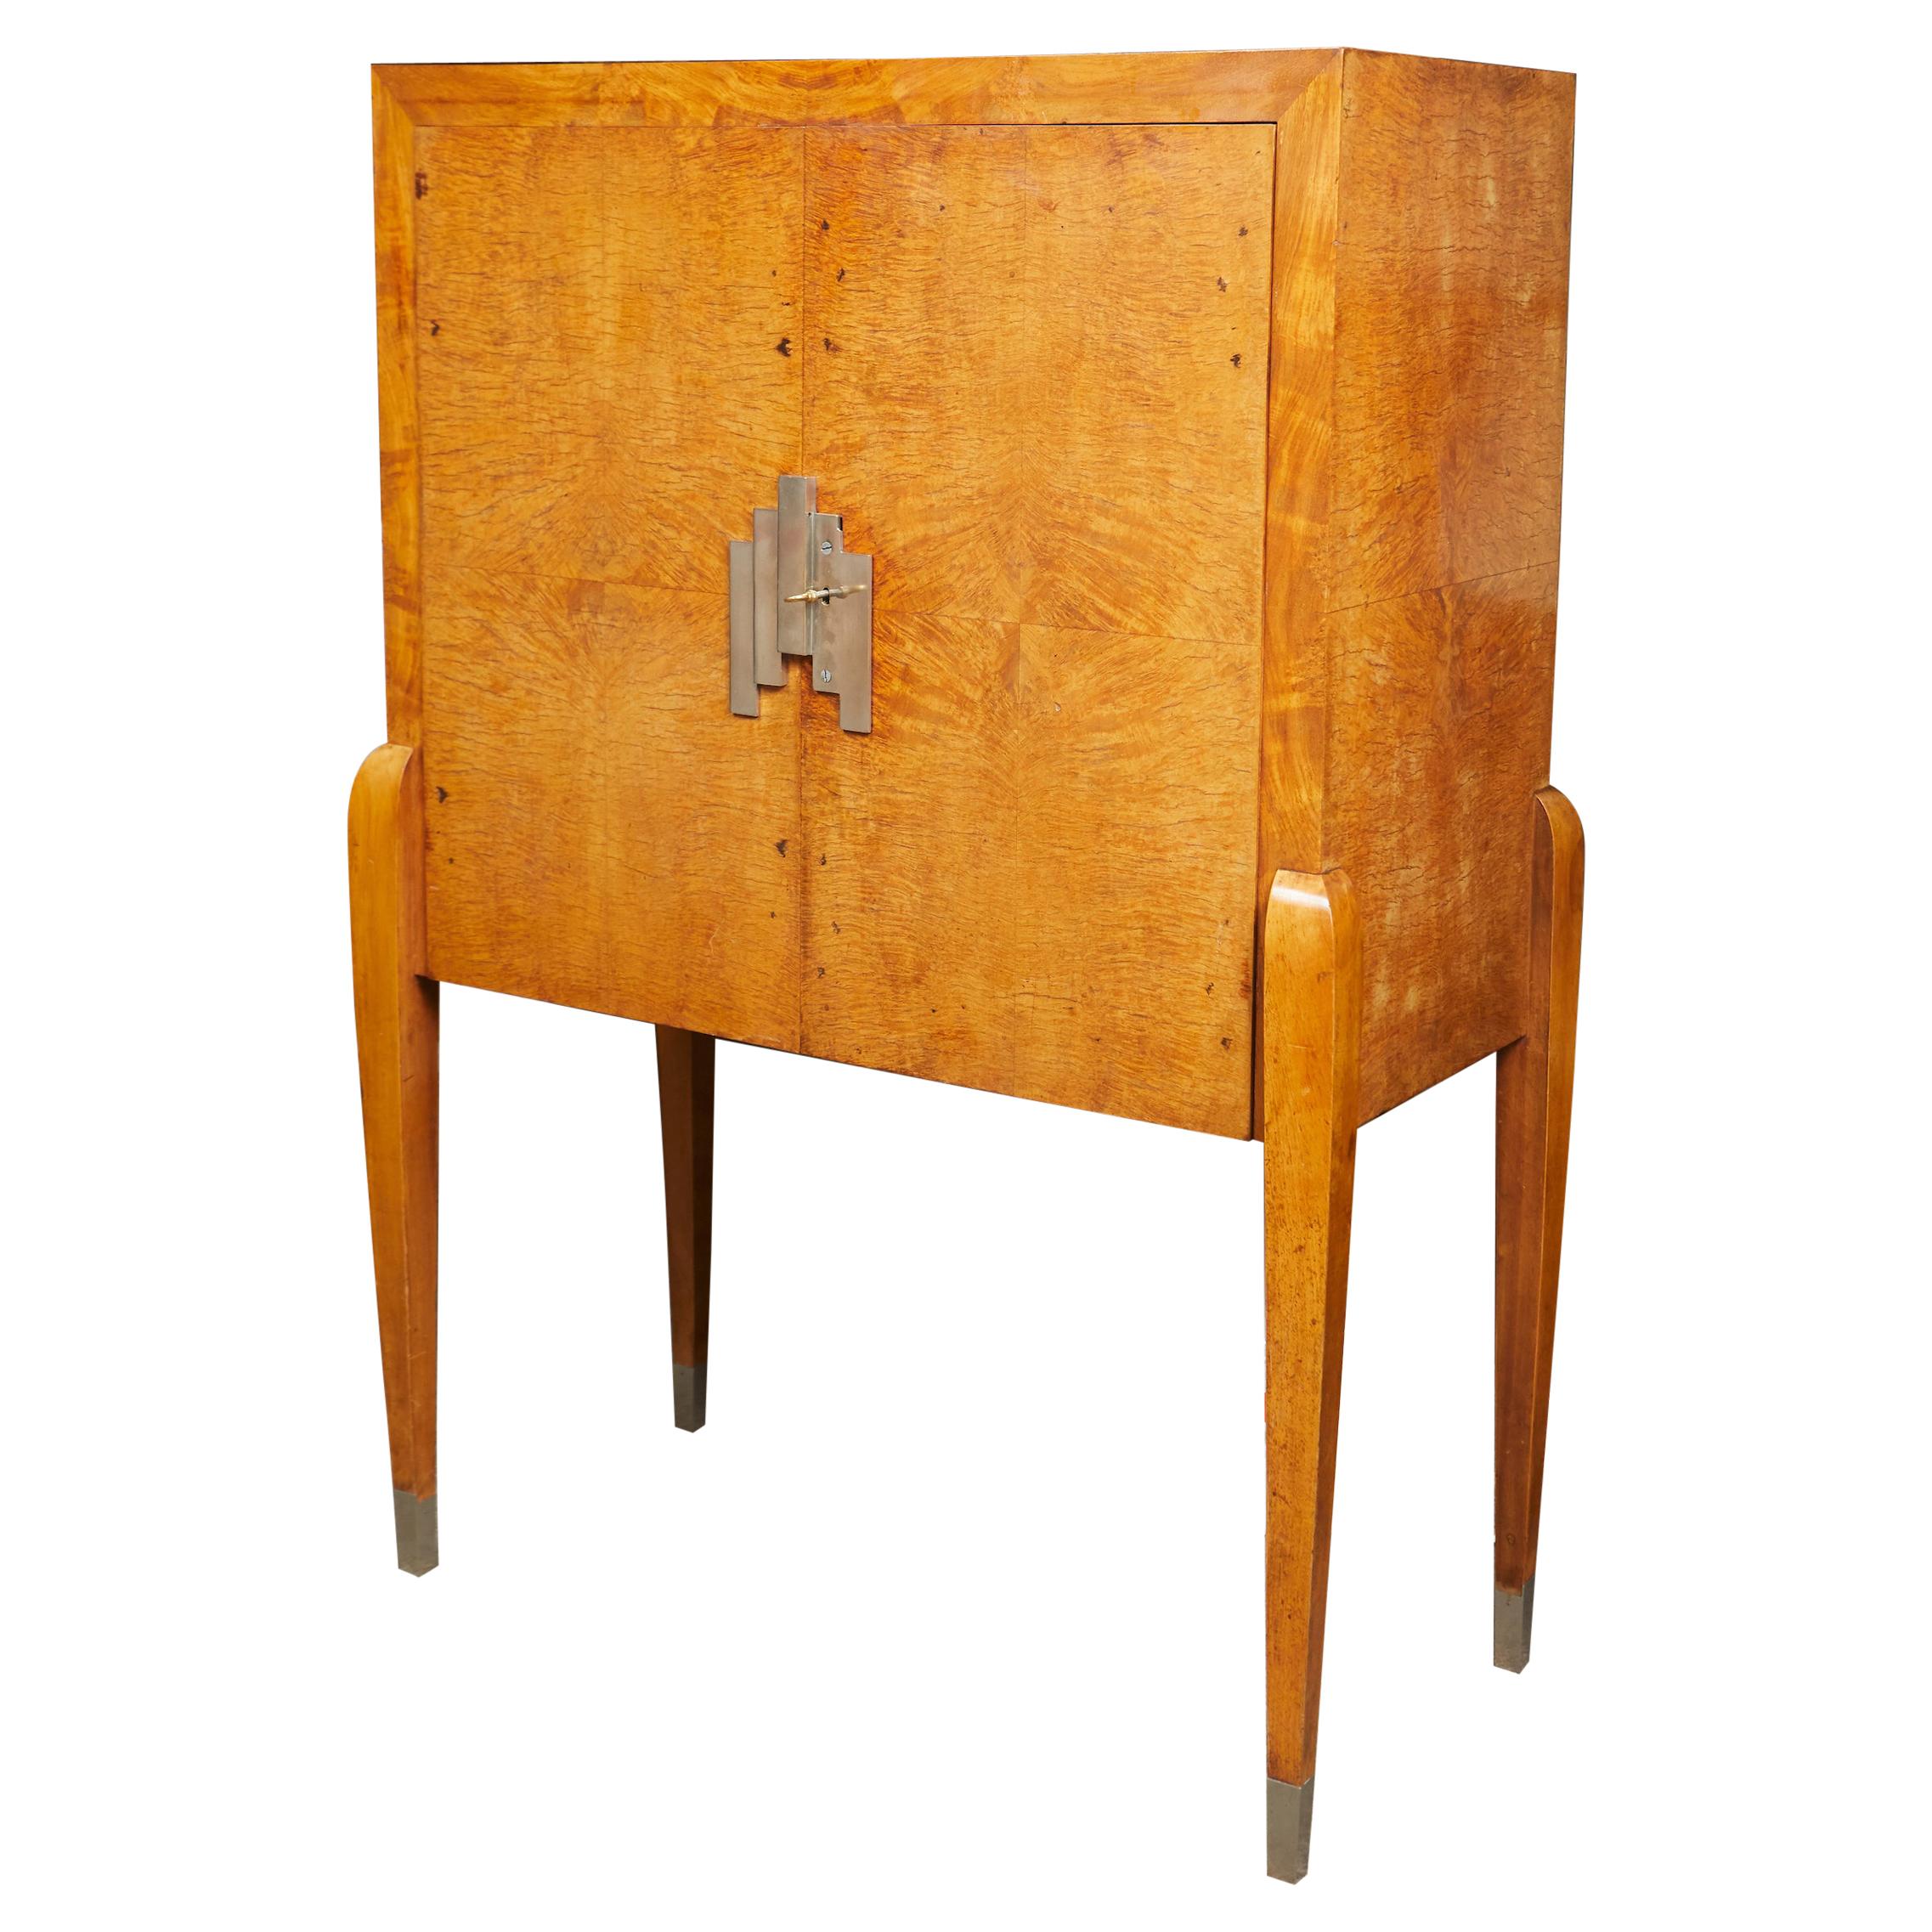 Burl Walnut Art Deco Bar Cabinet by Lucie Renaudot For Sale